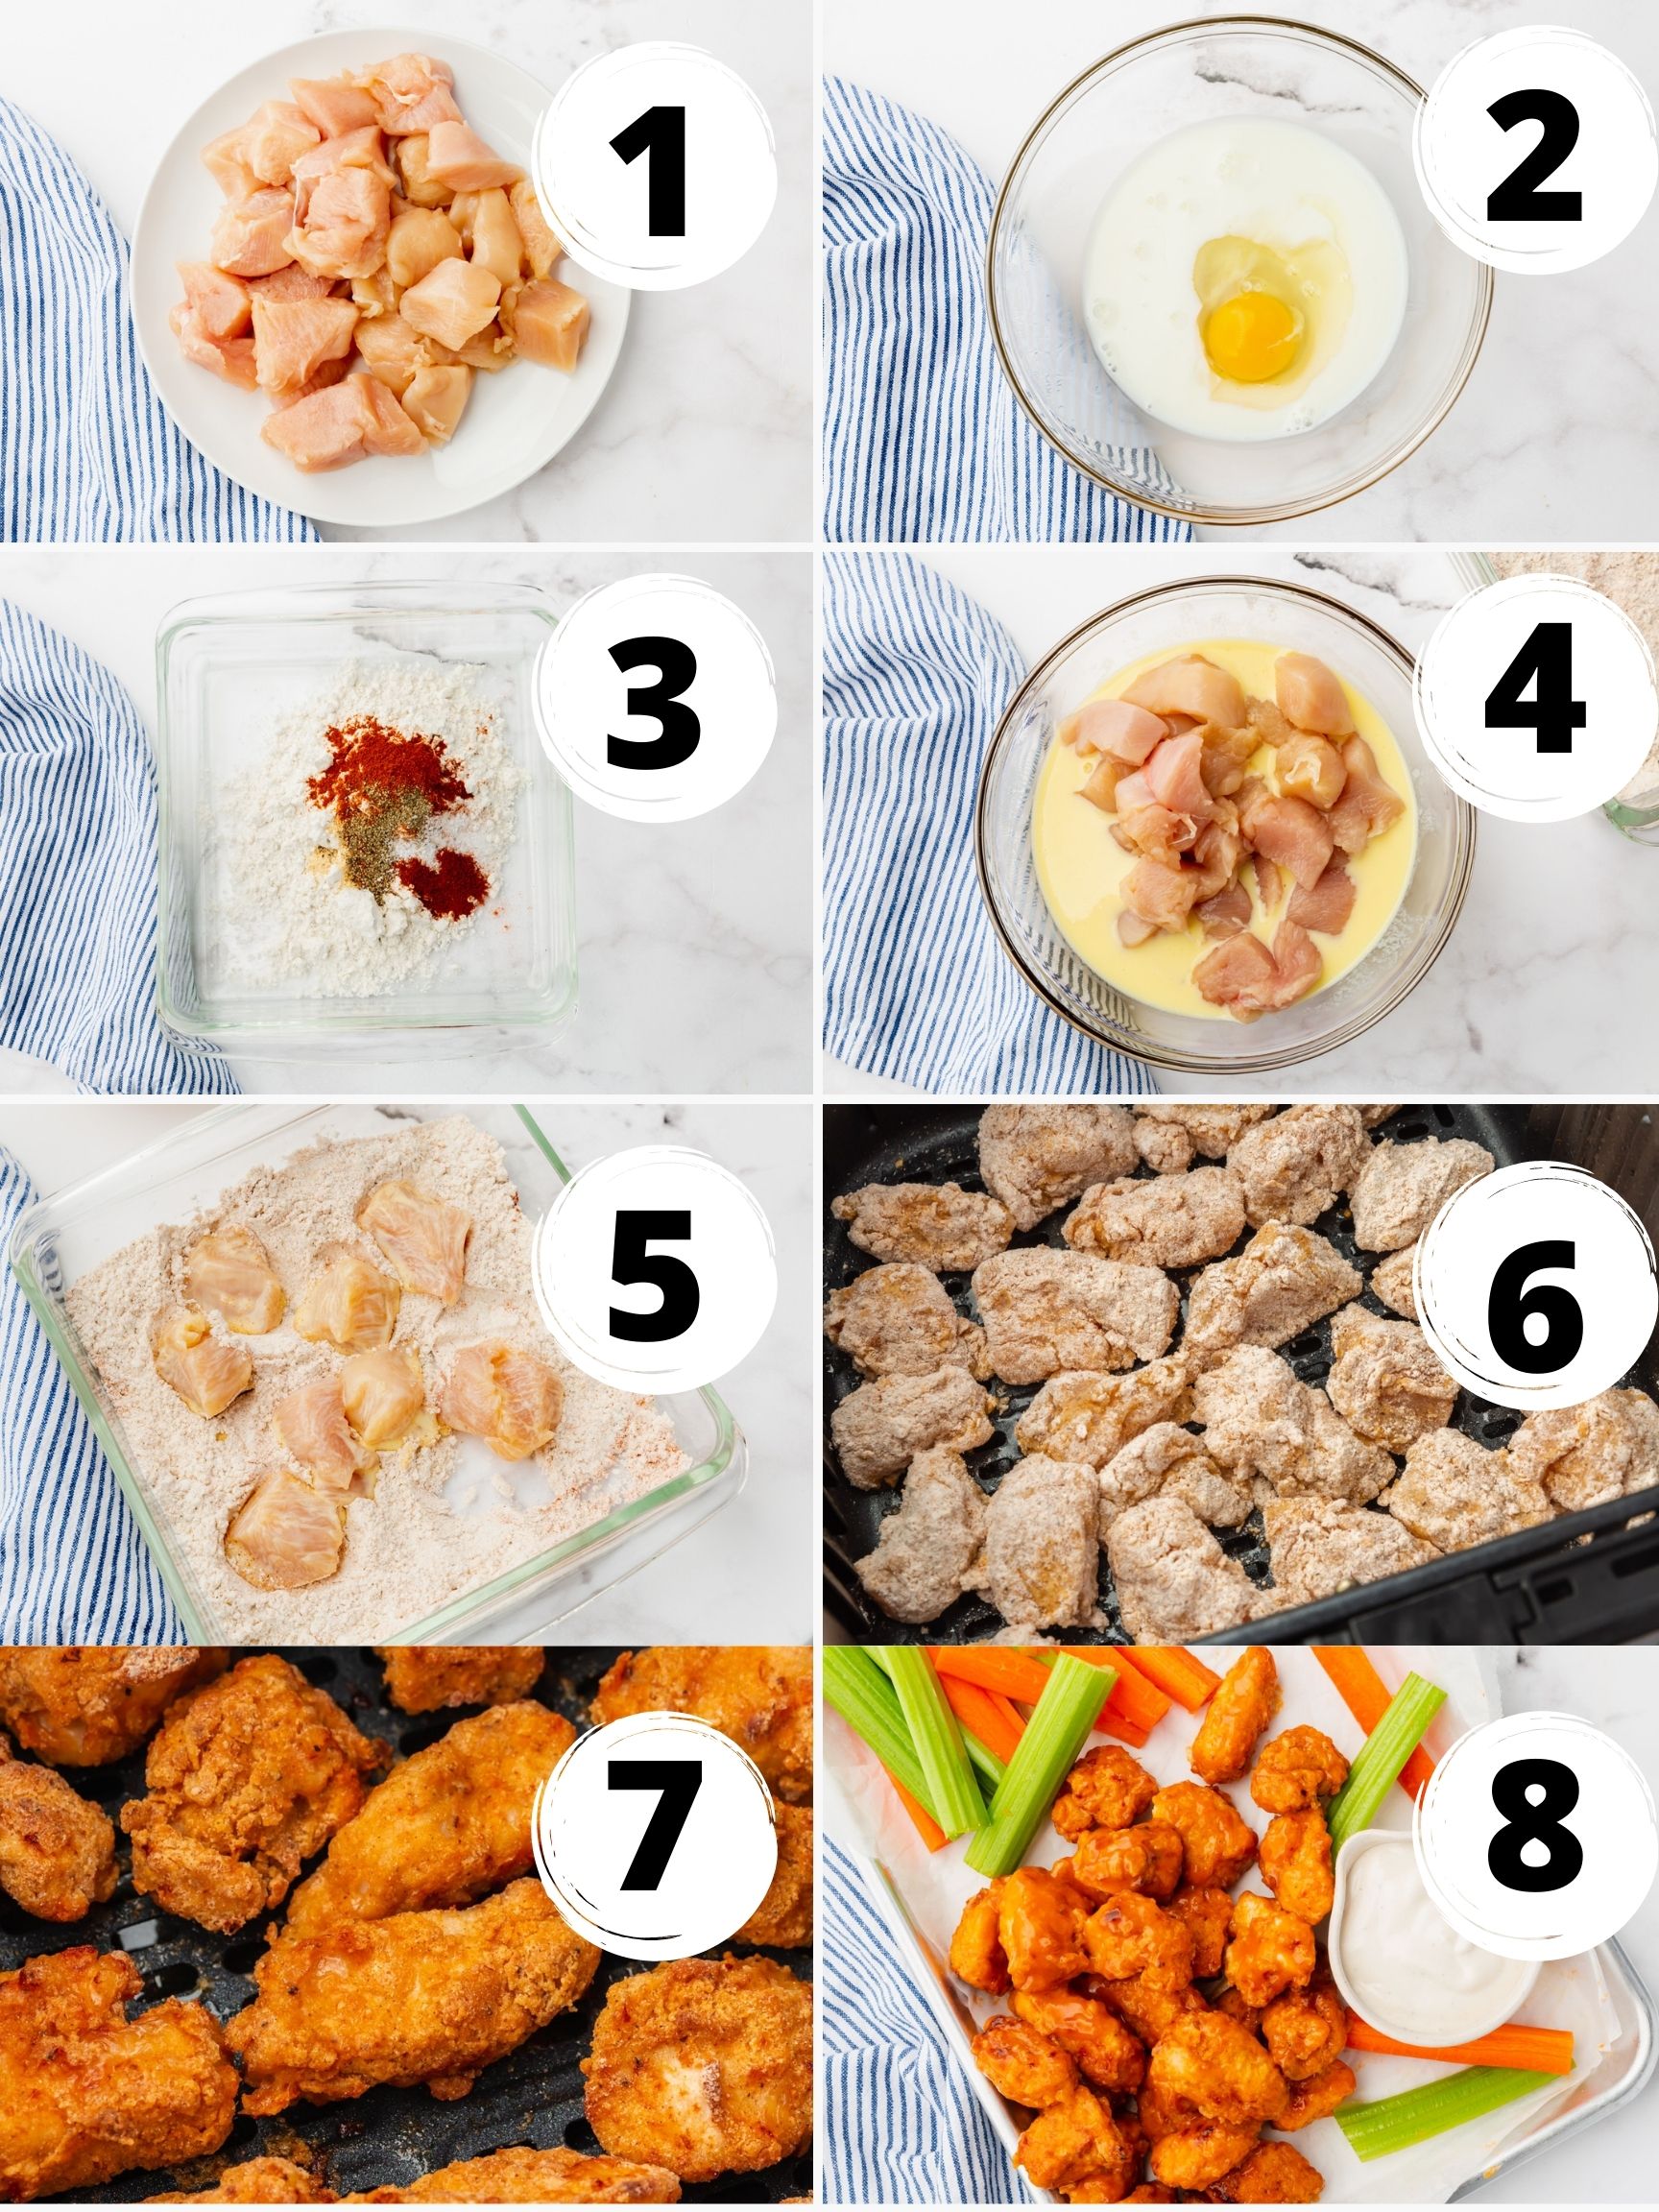 a collage of 8 images showing step by step instructions how to make air fryer boneless wings from scratch